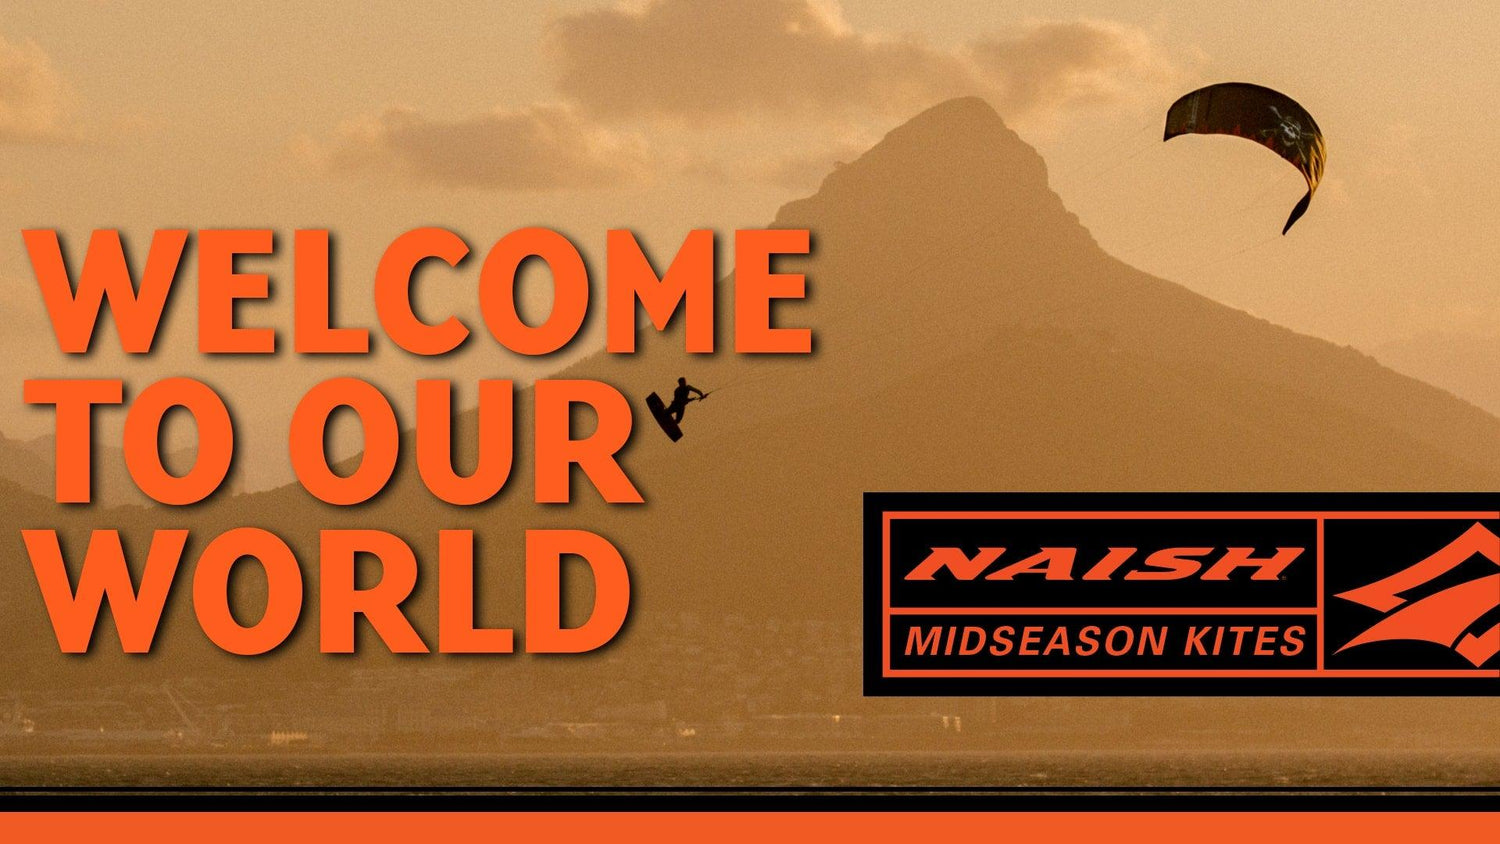 WELCOME TO OUR WORLD | Find Your Match With the NEW Naish S25 Kites - Naish.com